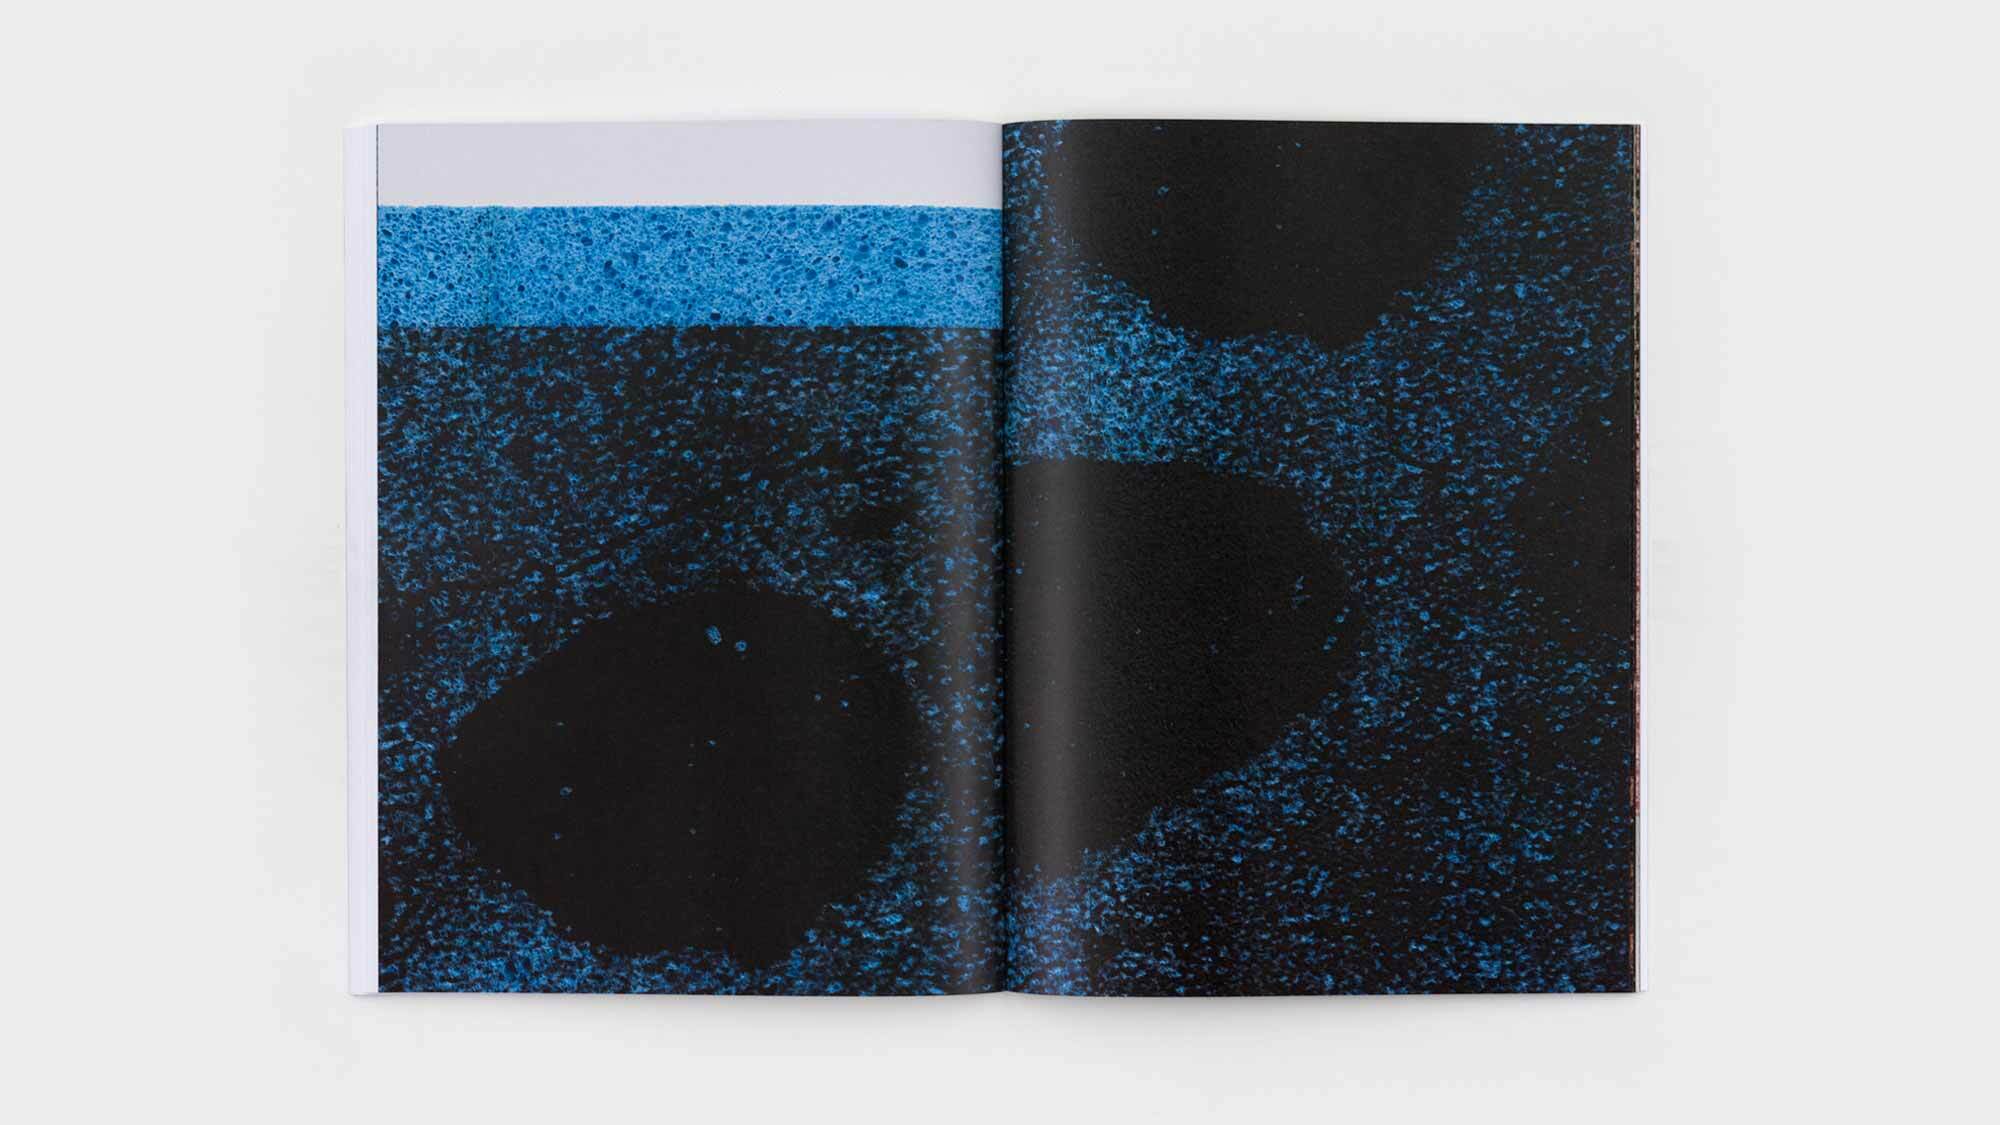 A spread with two detailed images of one of McEwen's inkjet-on-sponge paintings. The teal sponge has a martian surface pocked with craters.